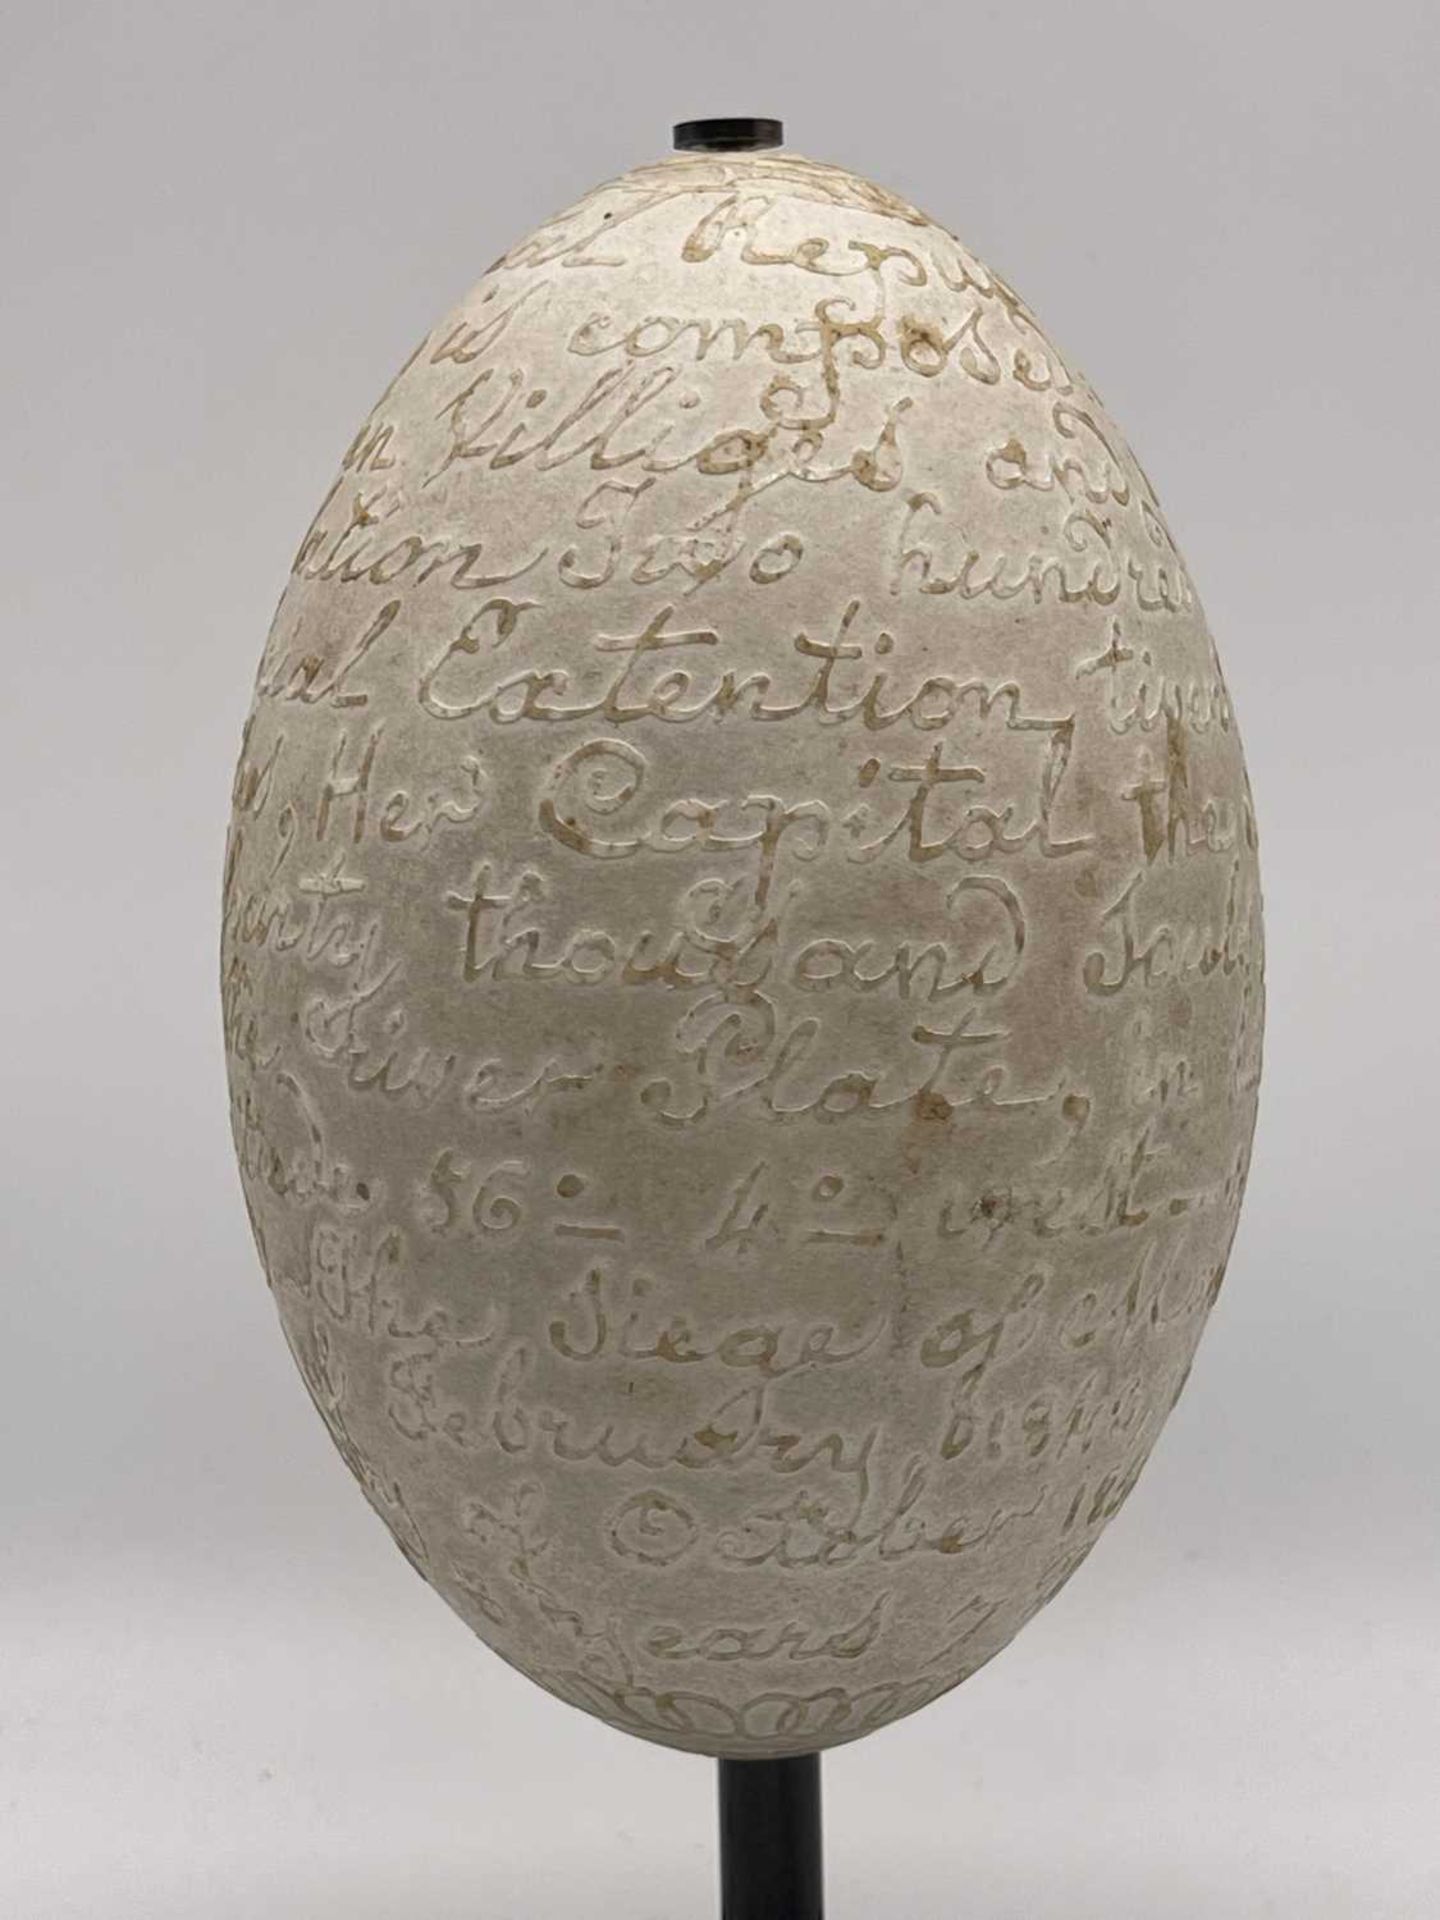 A carved rhea egg, - Image 10 of 15